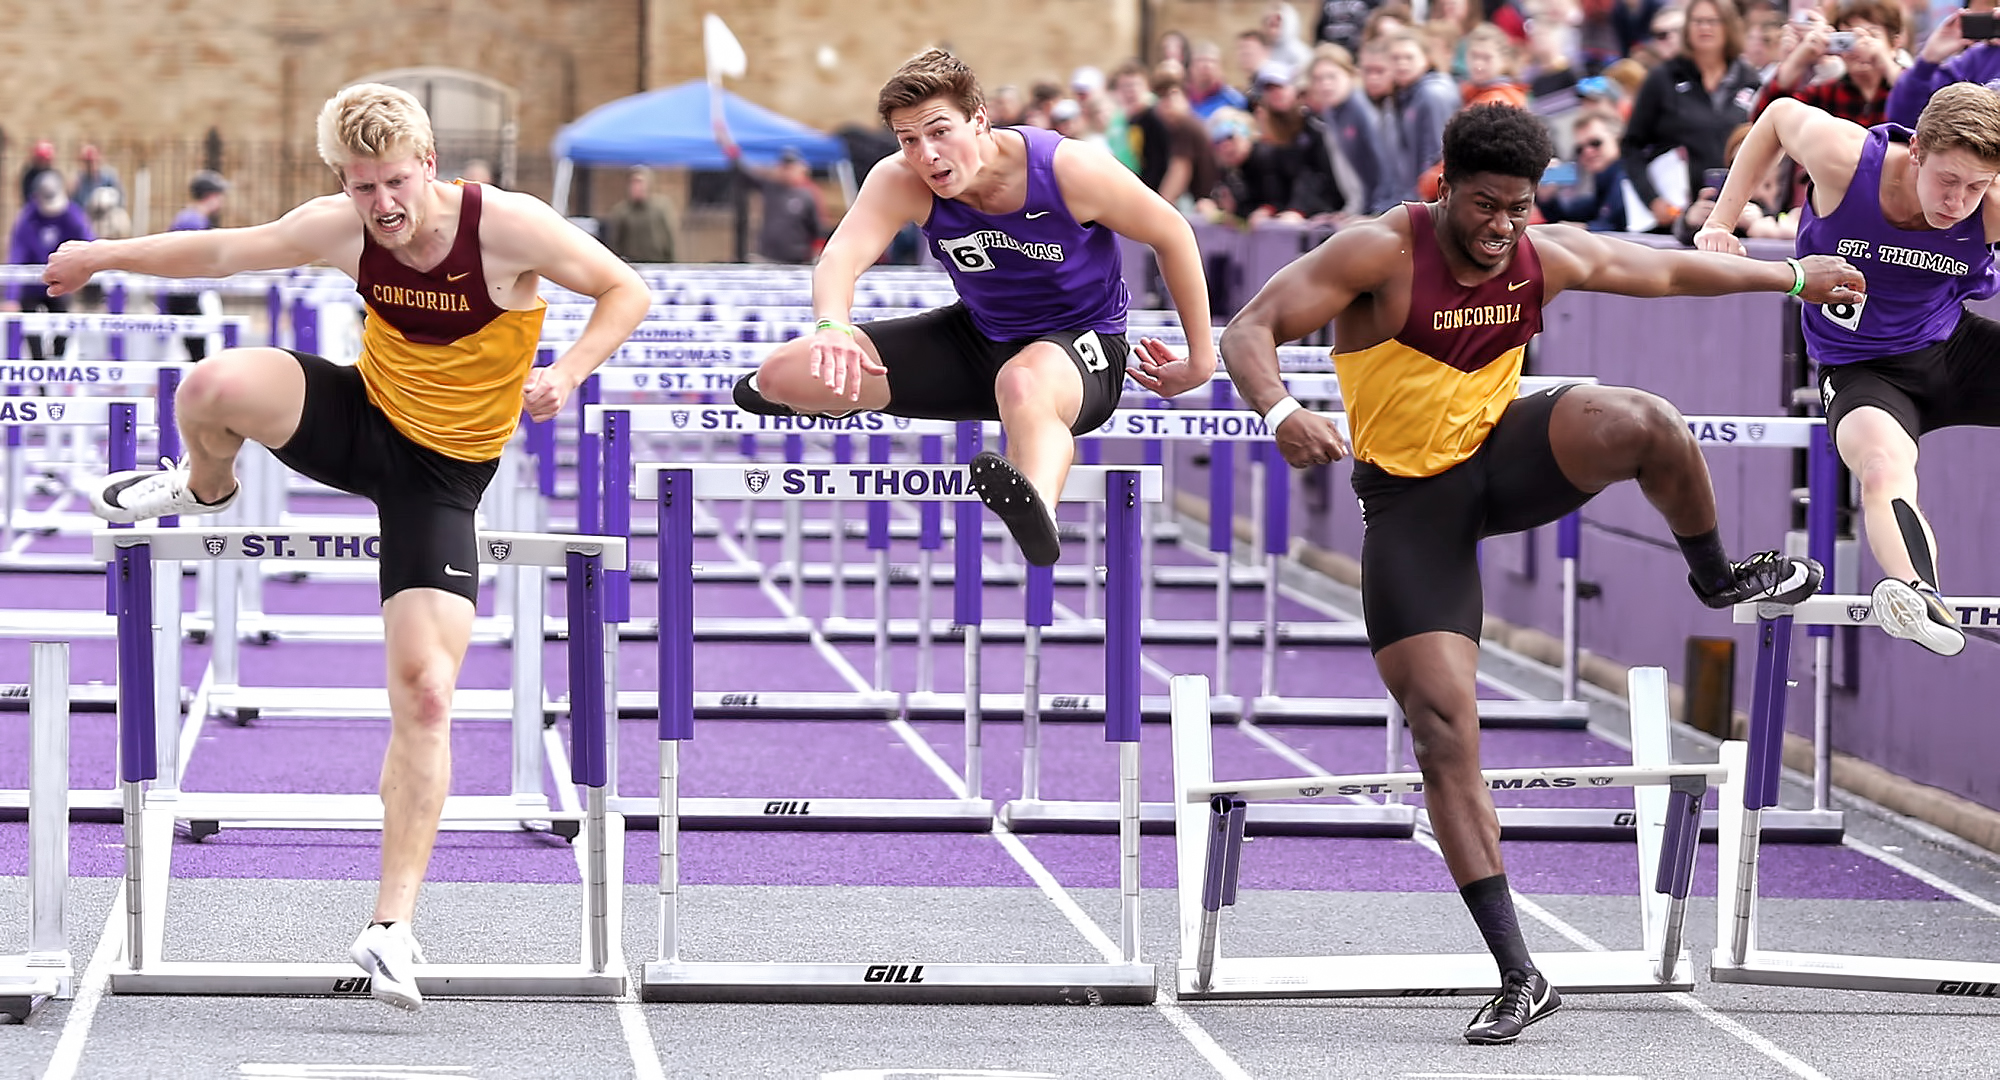 Willie Julkes (R) and Matt Bye both clear the last hurdle on their way to Top 5 finishes in the 110-meter hurdles at the MIAC Meet. (Photo courtesy of Nathan Lodermeier).